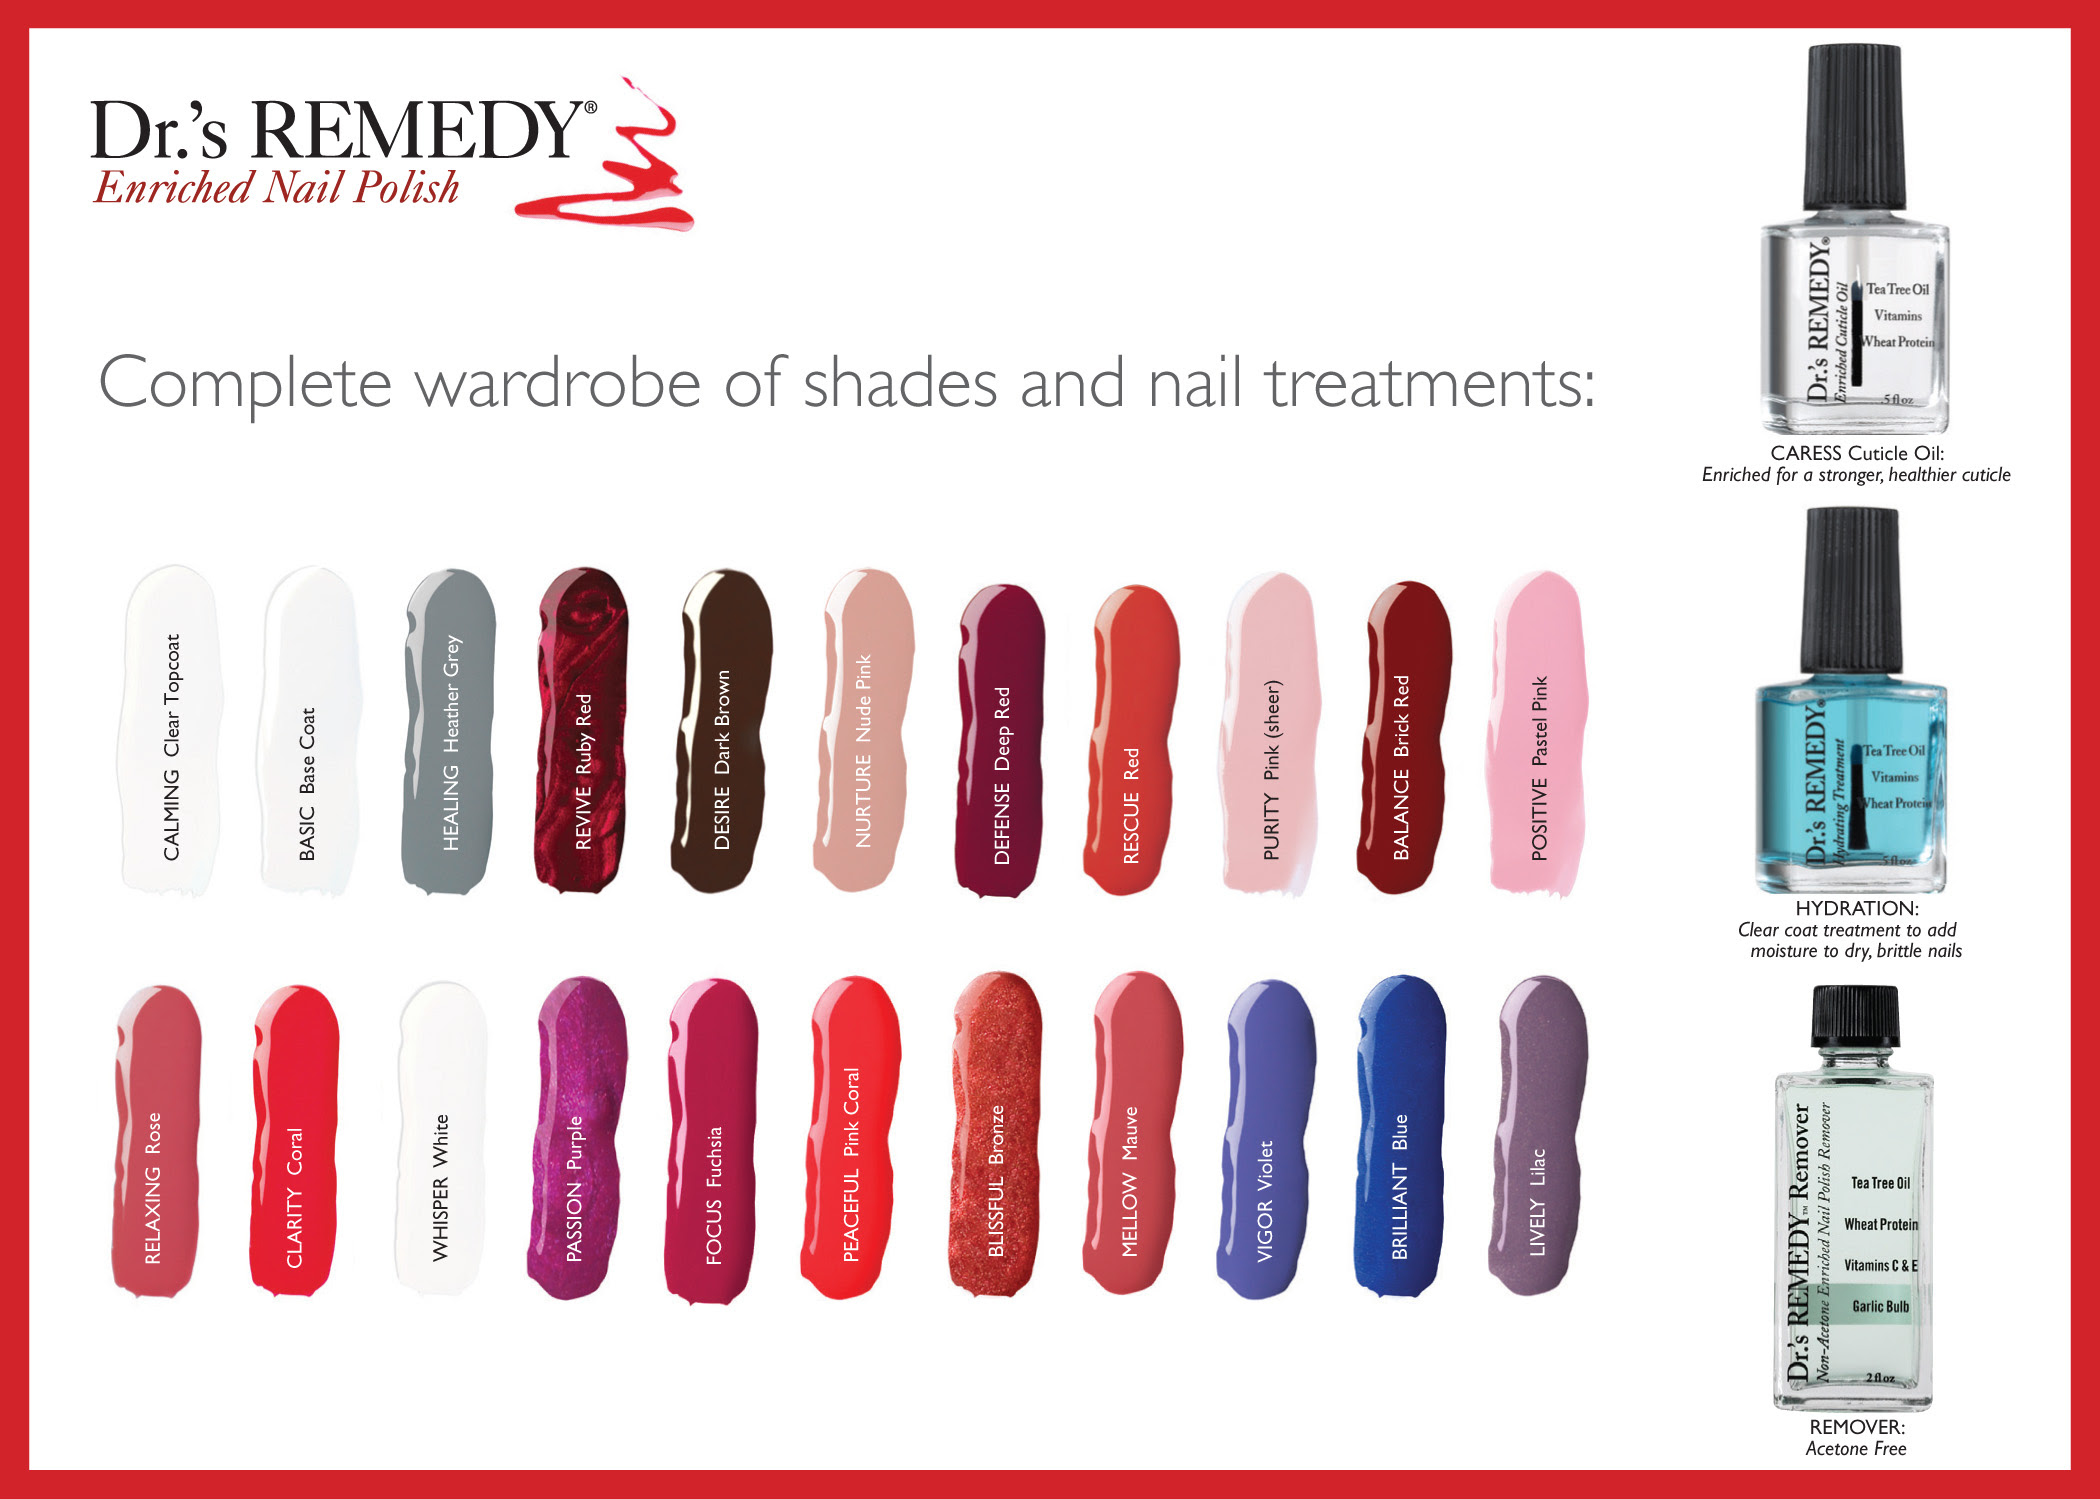 Dr. Remedy Nail Polish Colors - wide 4